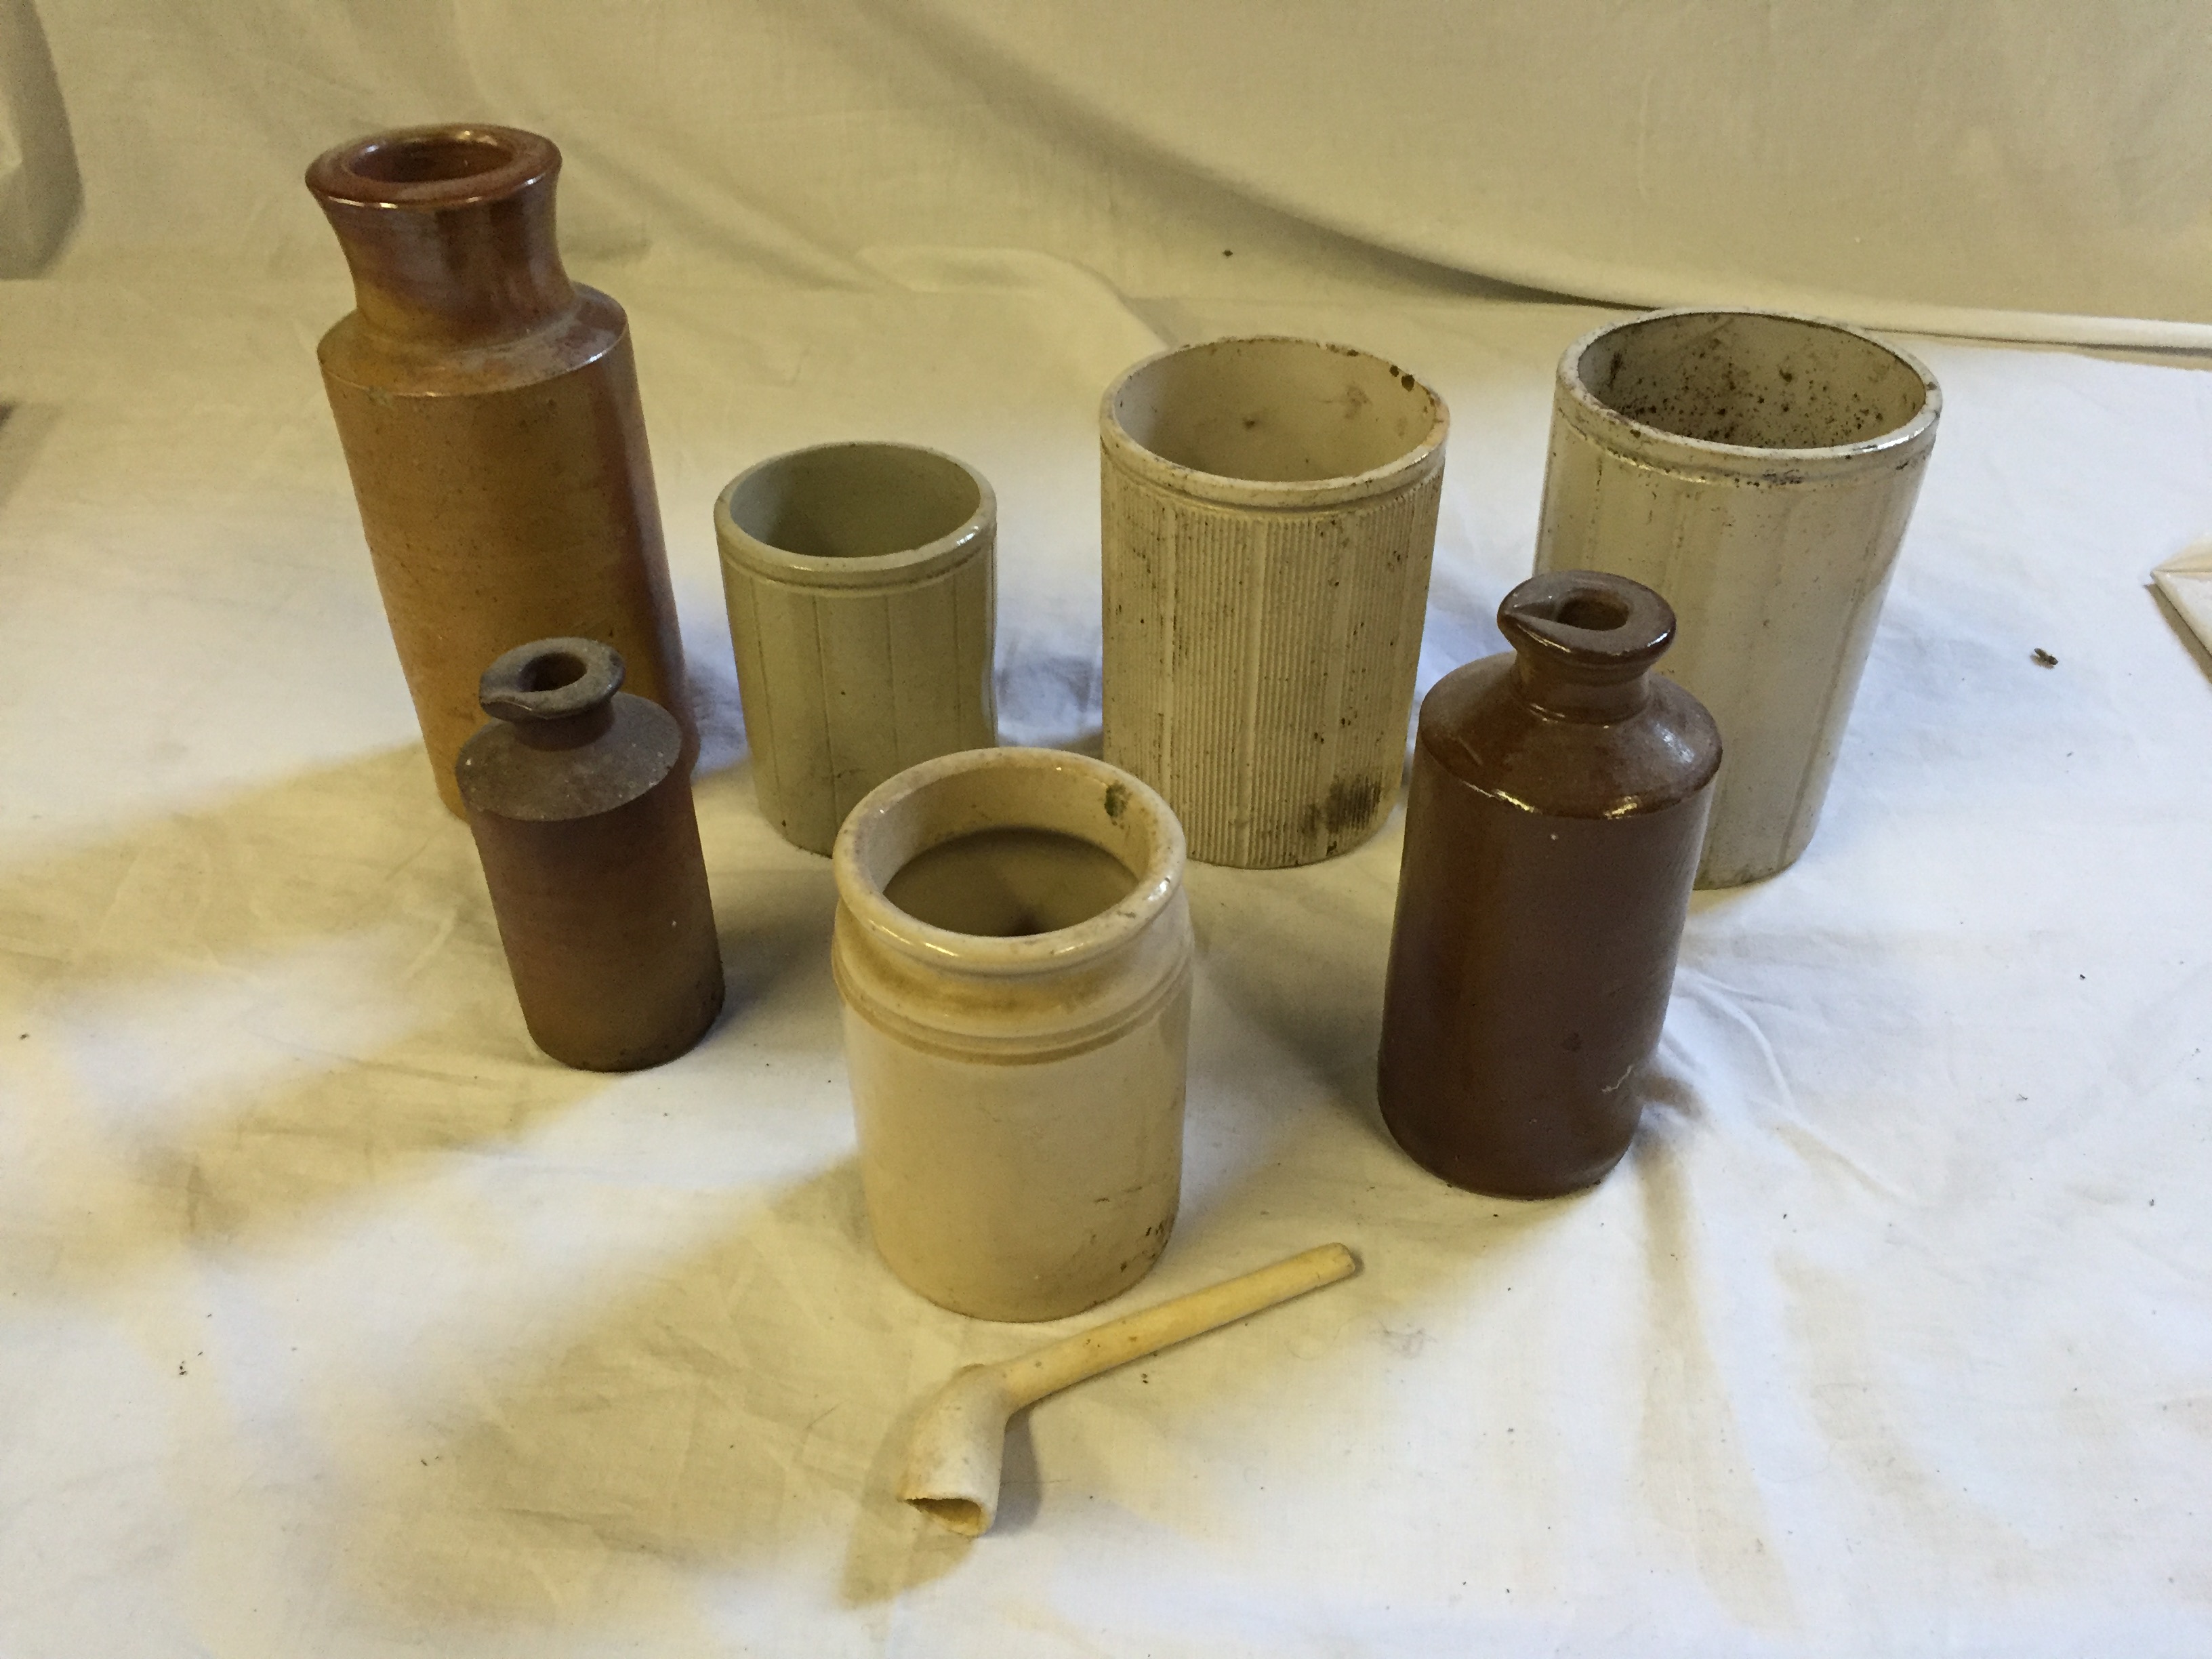 Stoneware ink bottles and other stoneware pots and a clay pipe.